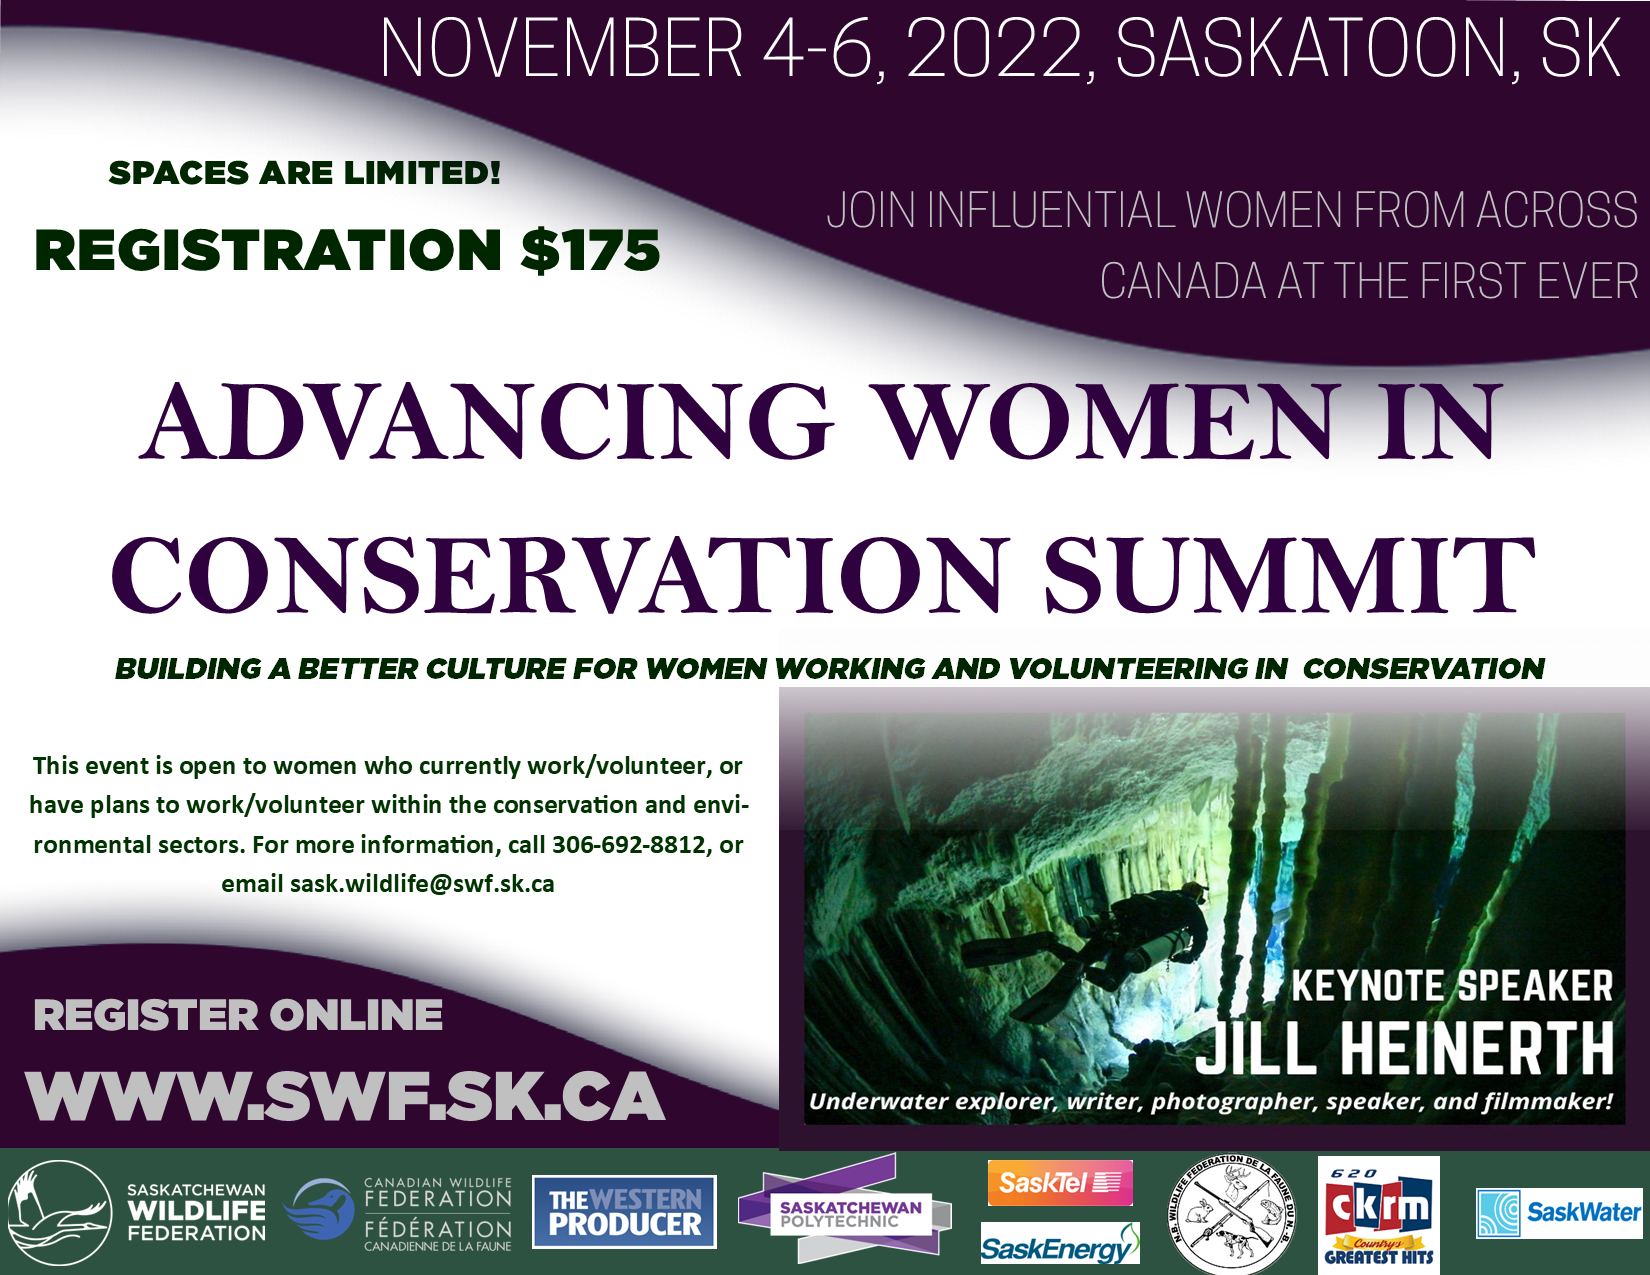 The Saskatchewan Wildlife Federation (SWF) is excited to announce the first-ever Canadian Advancing Women in Conservation (AWIC) Summit!